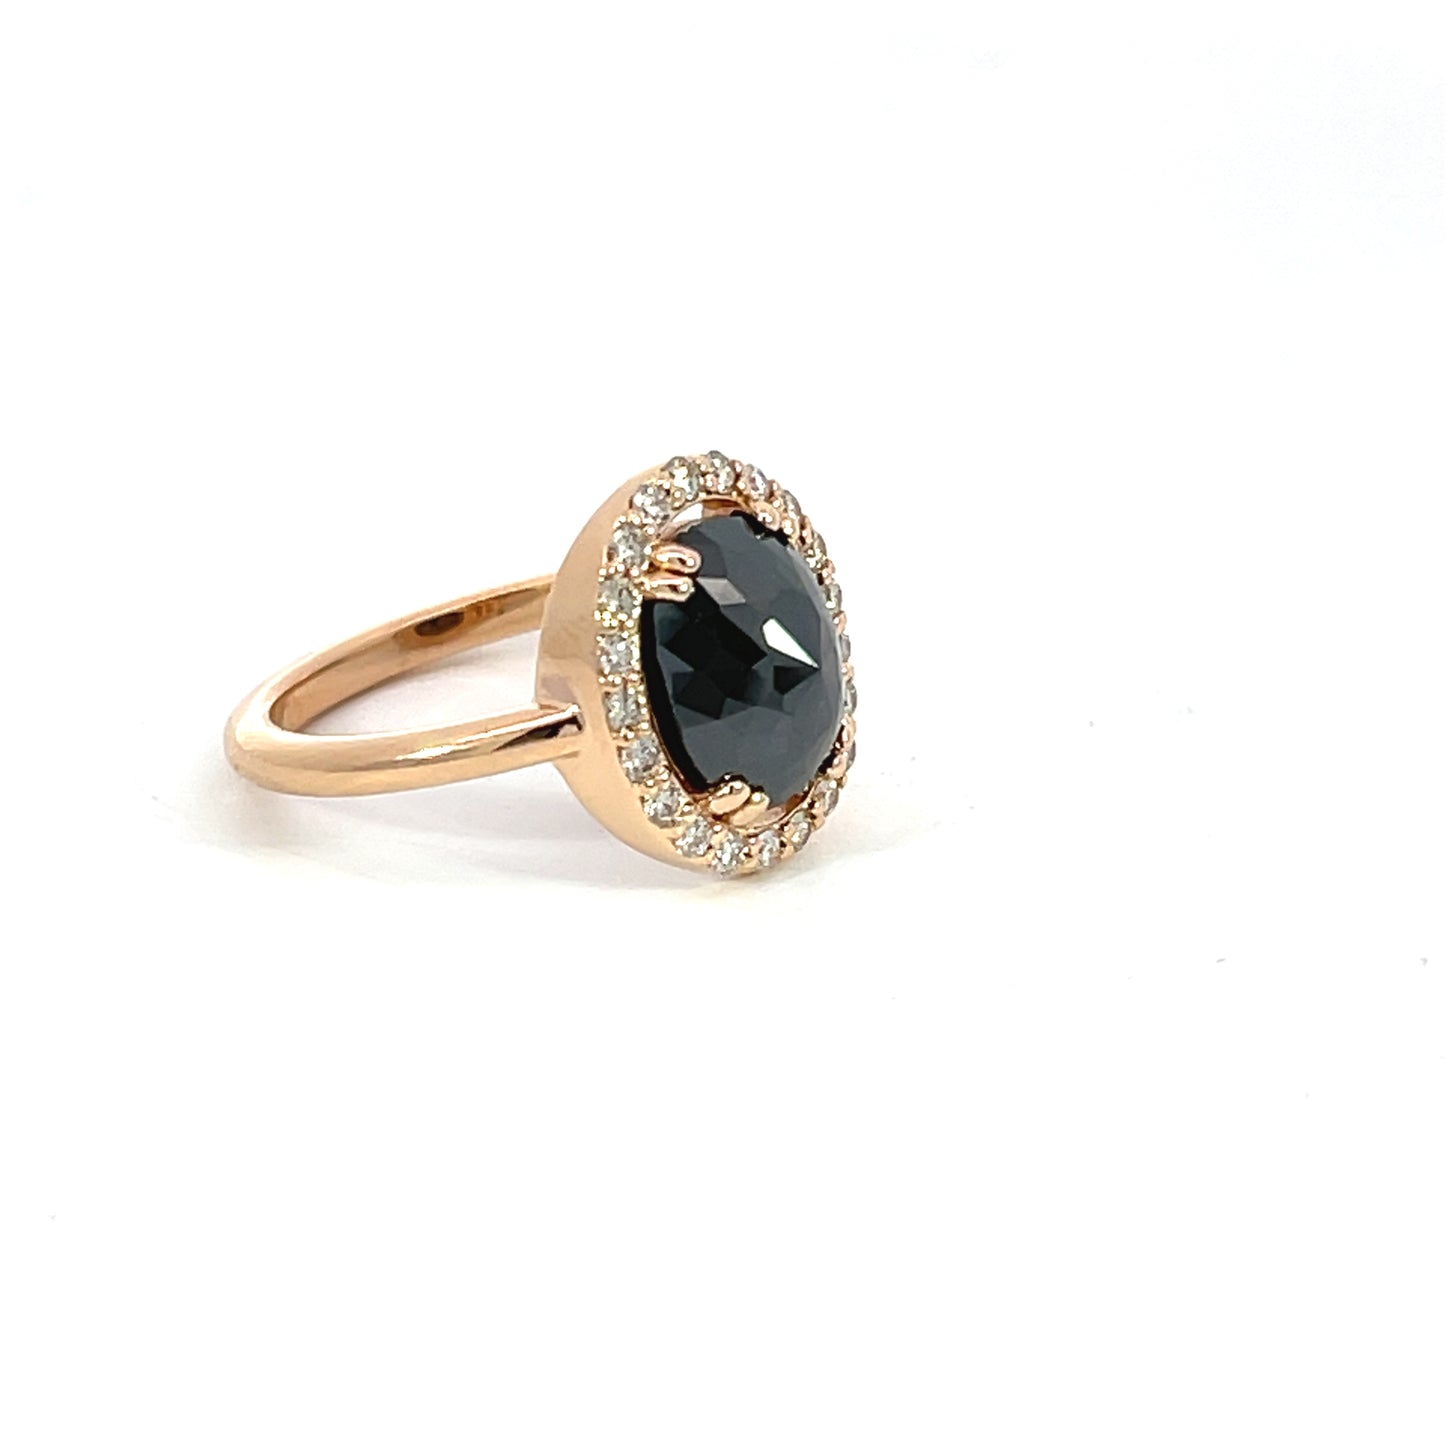 18k Rose Gold Ring with a Black Rose Cut Diamond and a Champagne Diamond Halo